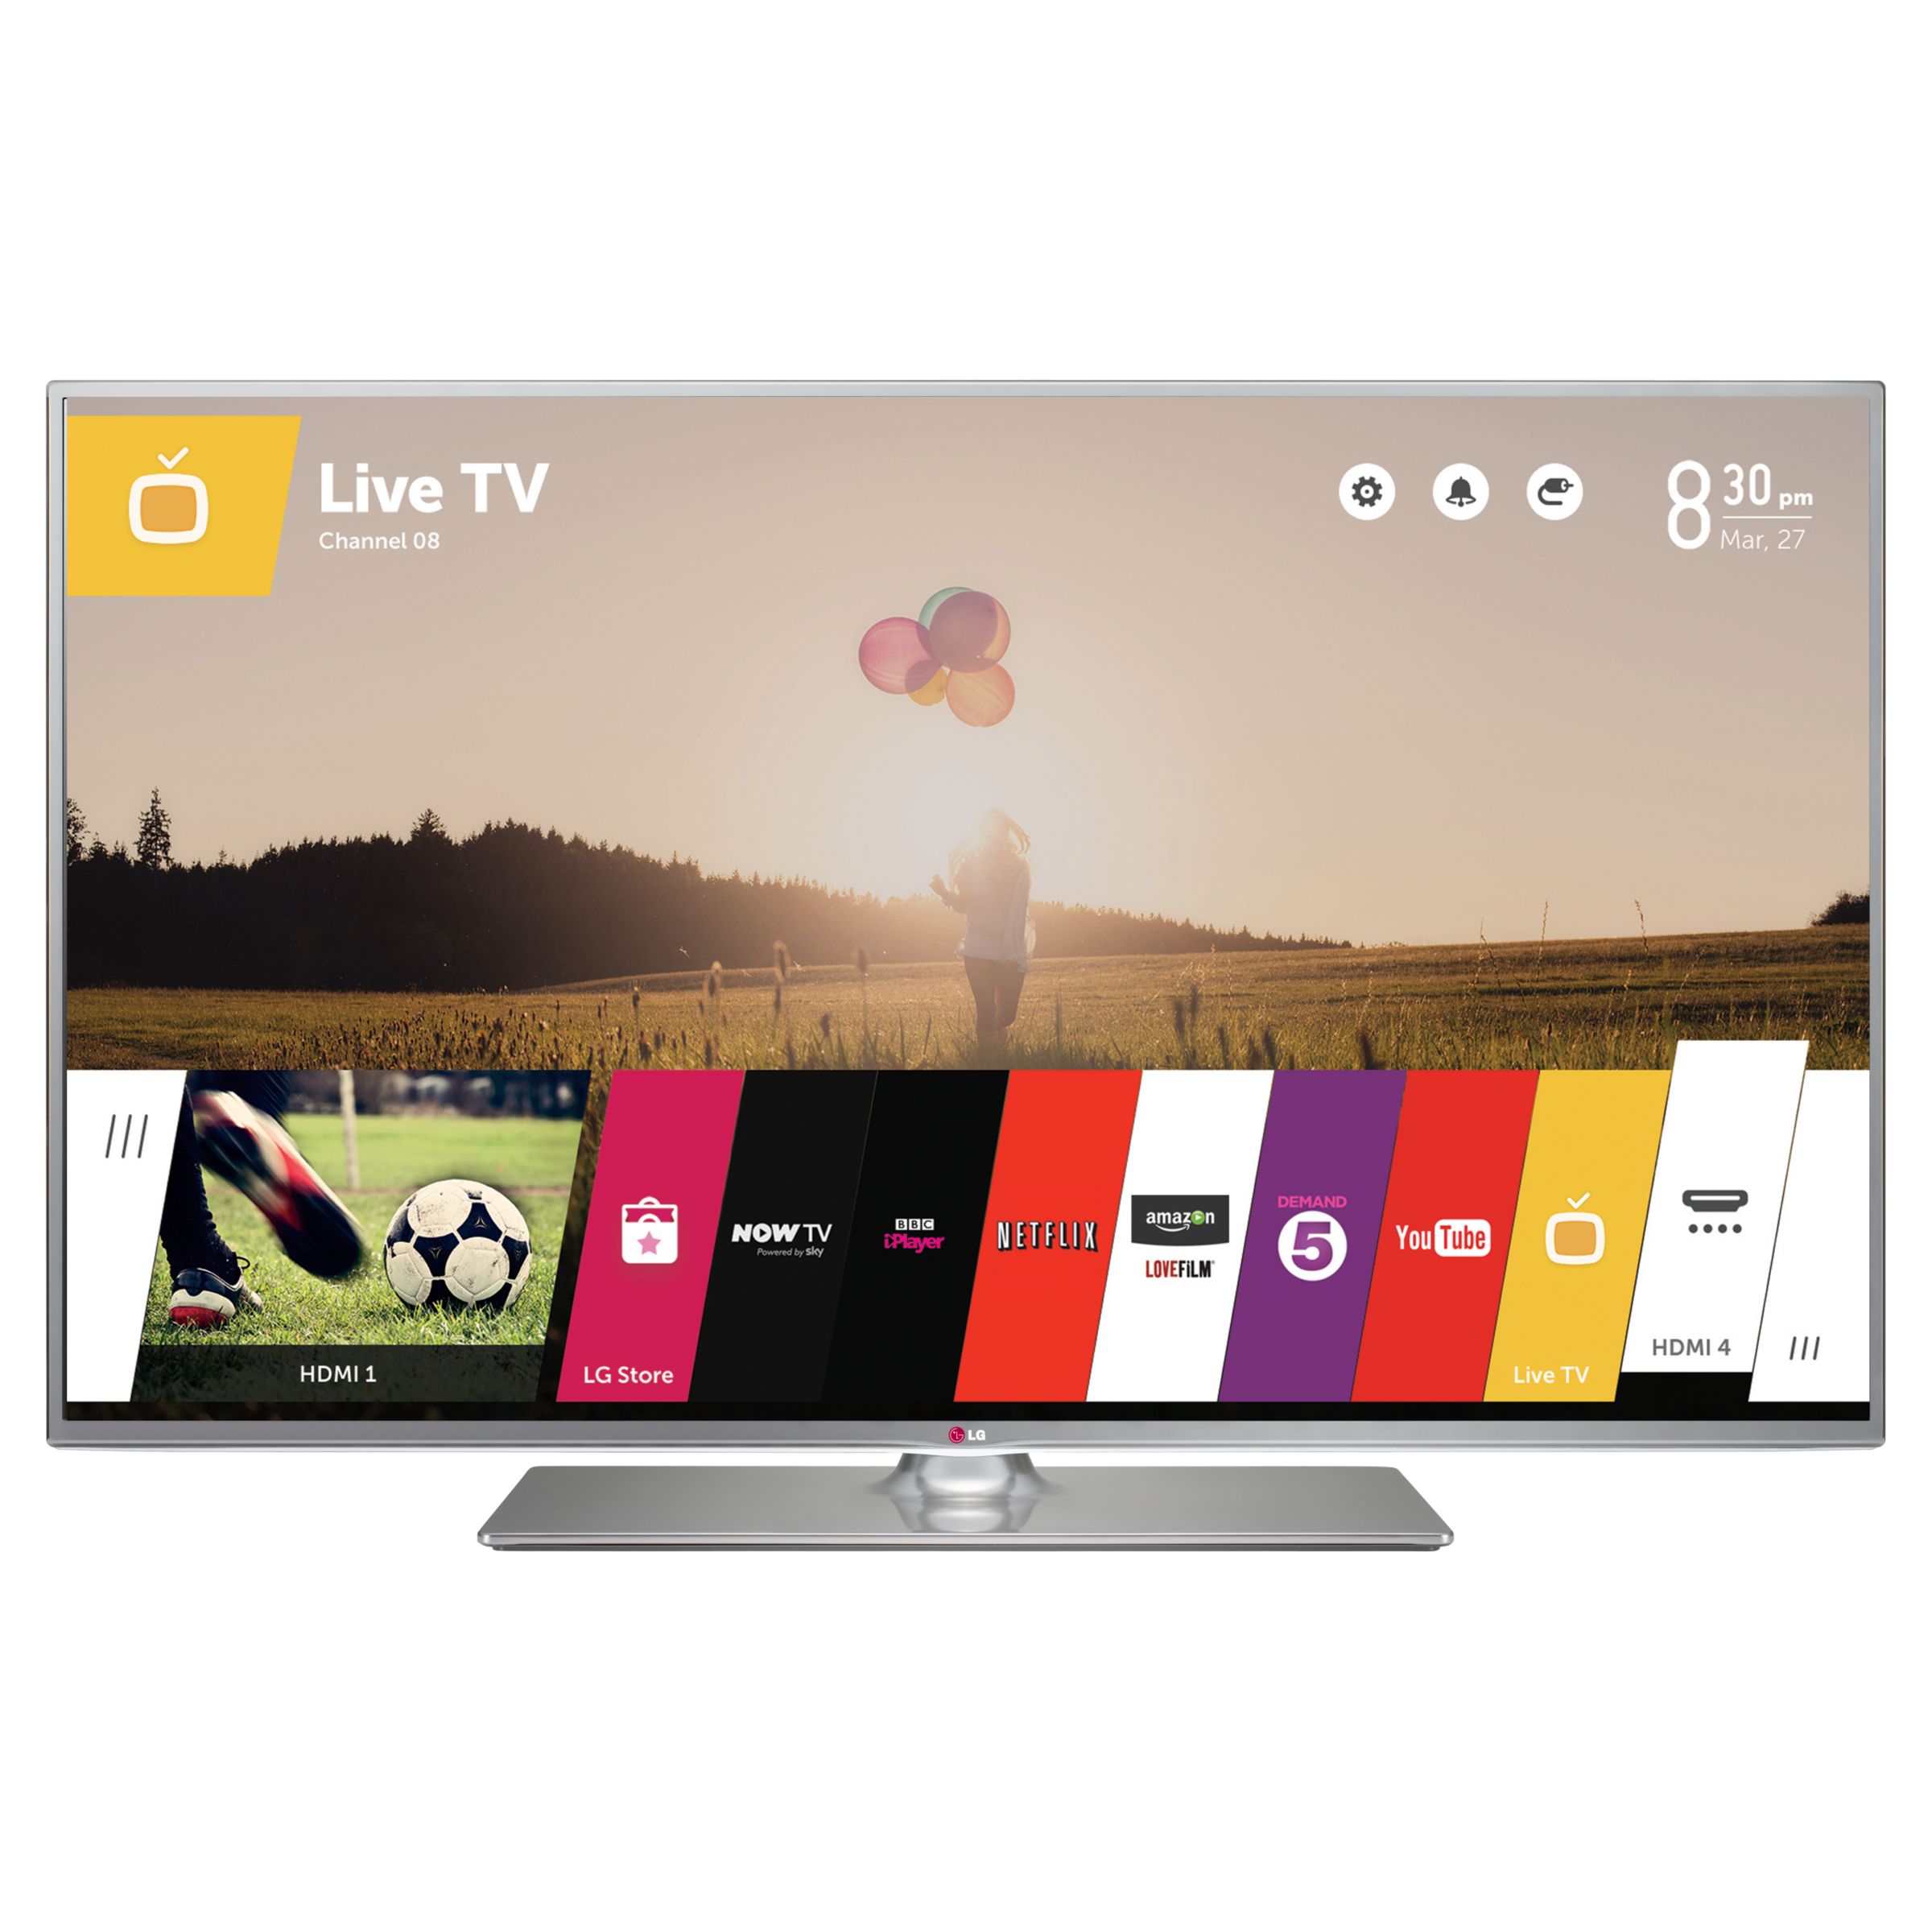 LG 42LB650V LED HD 1080p 3D Smart TV, 42" with Freeview HD